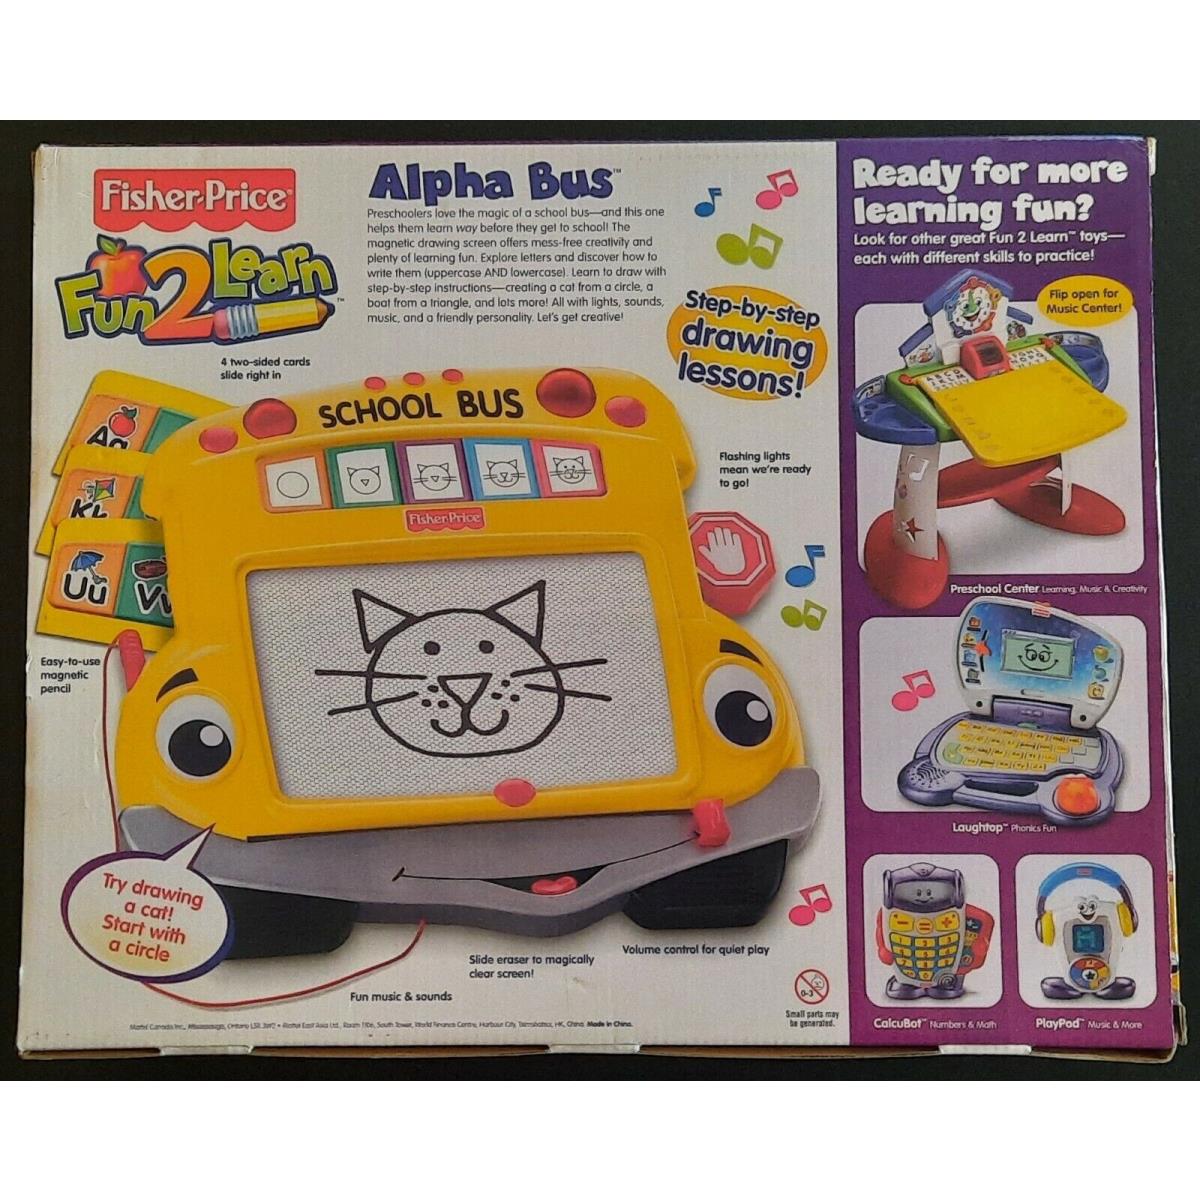 Alpha Bus Fun To Learn Teaching Toy By Fisher Price From 2006 - Vintage